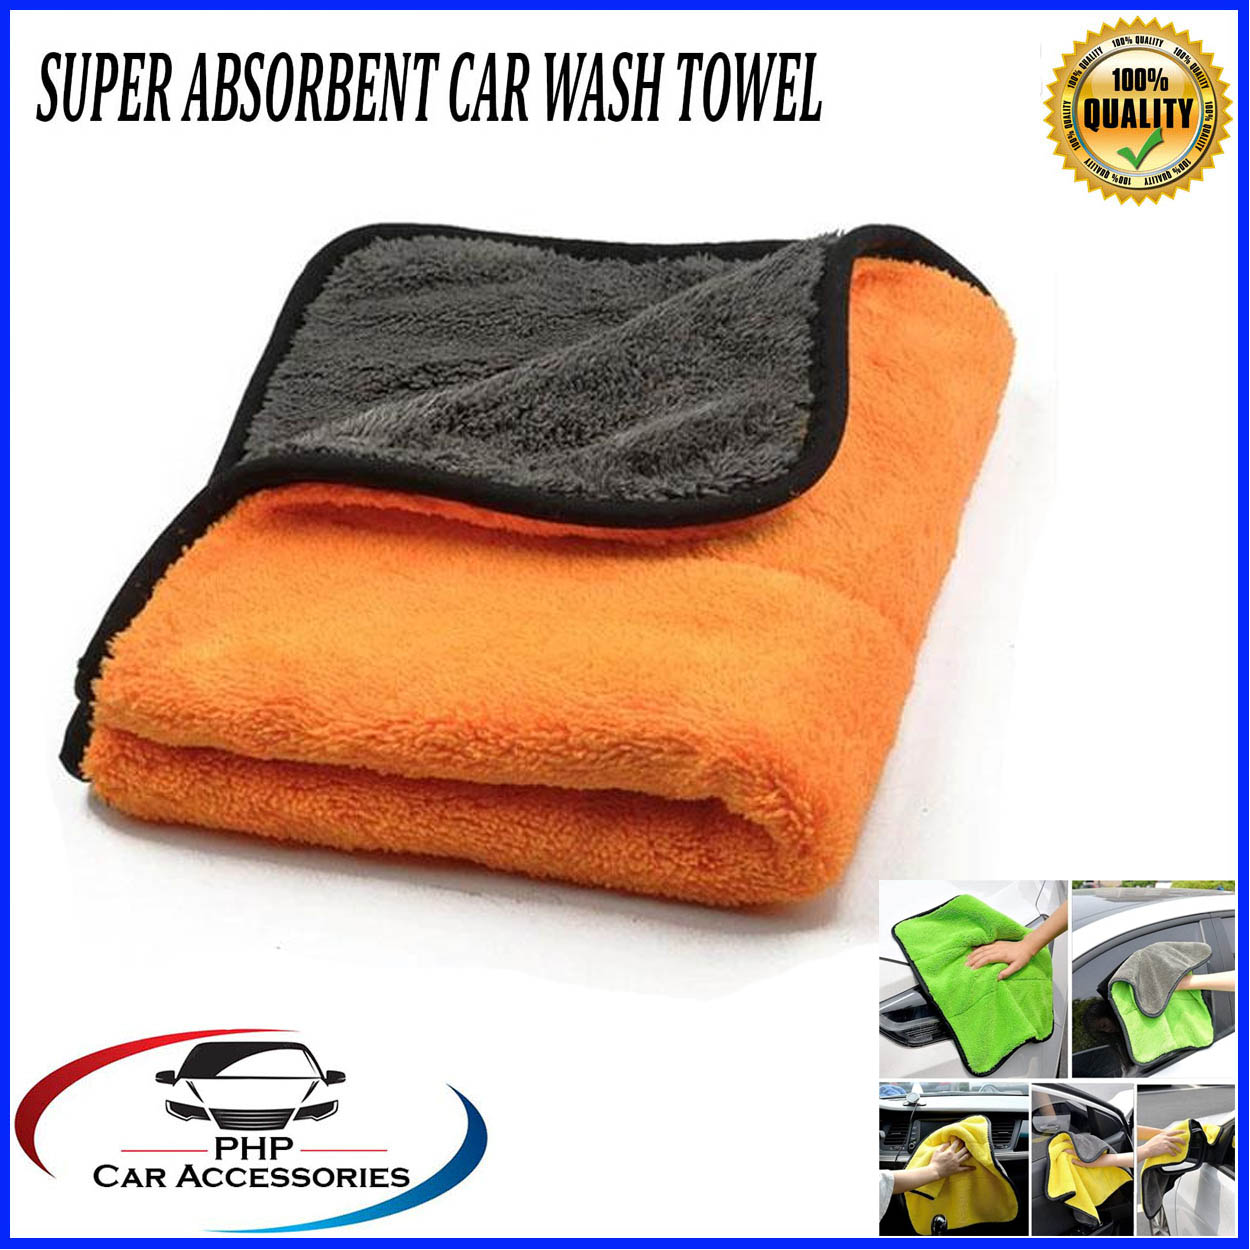 Micro Fiber Clothes for Cars Premium Microfiber Towels for Cars 16x16 Upgrade Microfiber Cleaning Cloth for Cars. Double-Sided Car Drying Towels Ultra Thick Drying Towels Car Detailing 